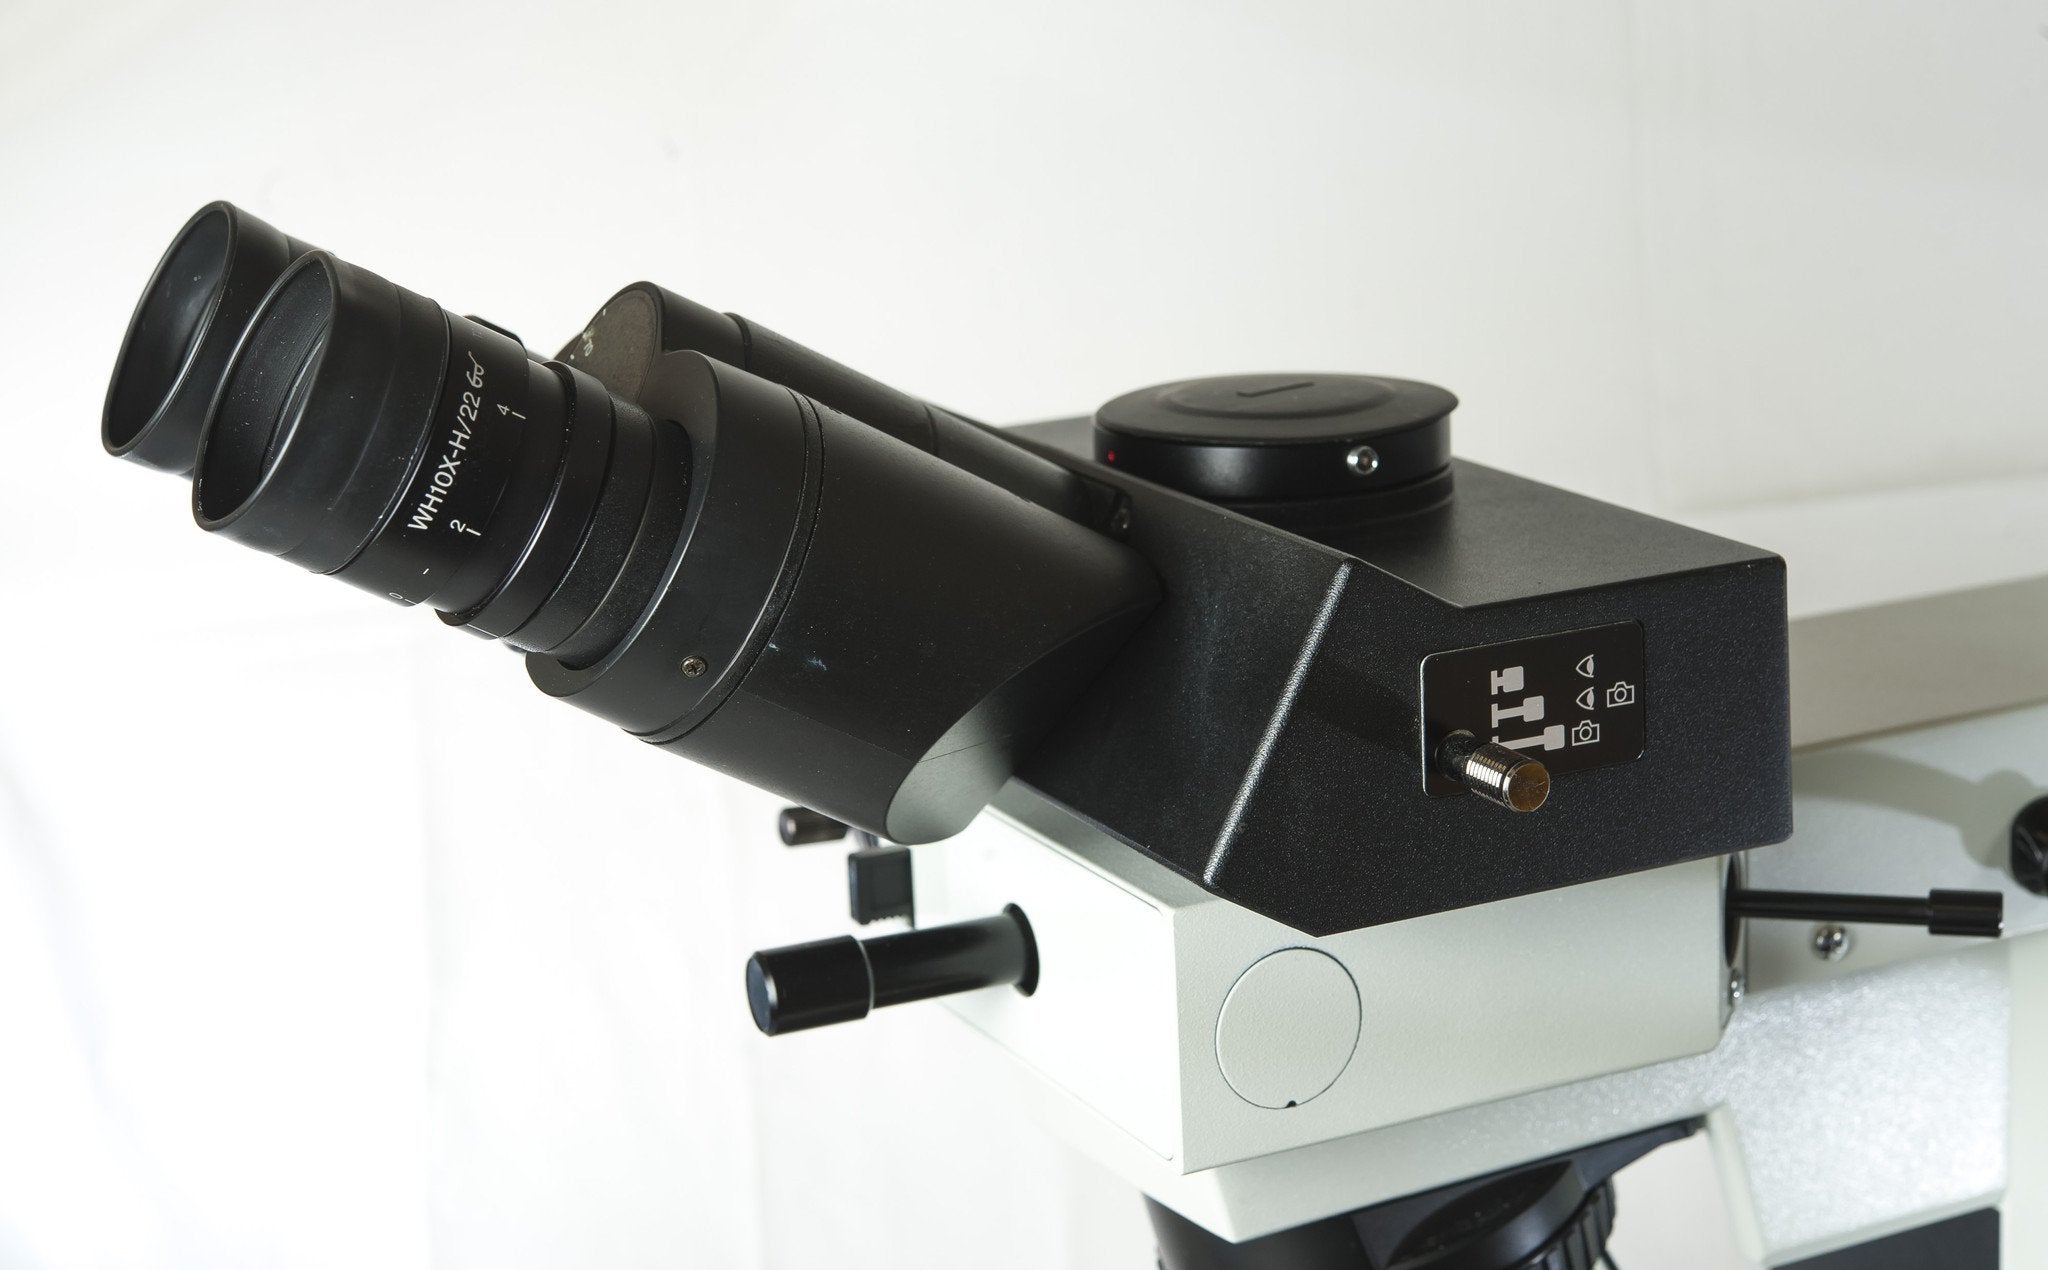 Olympus BX40 Dual Viewing Microscope - Face-To-Face